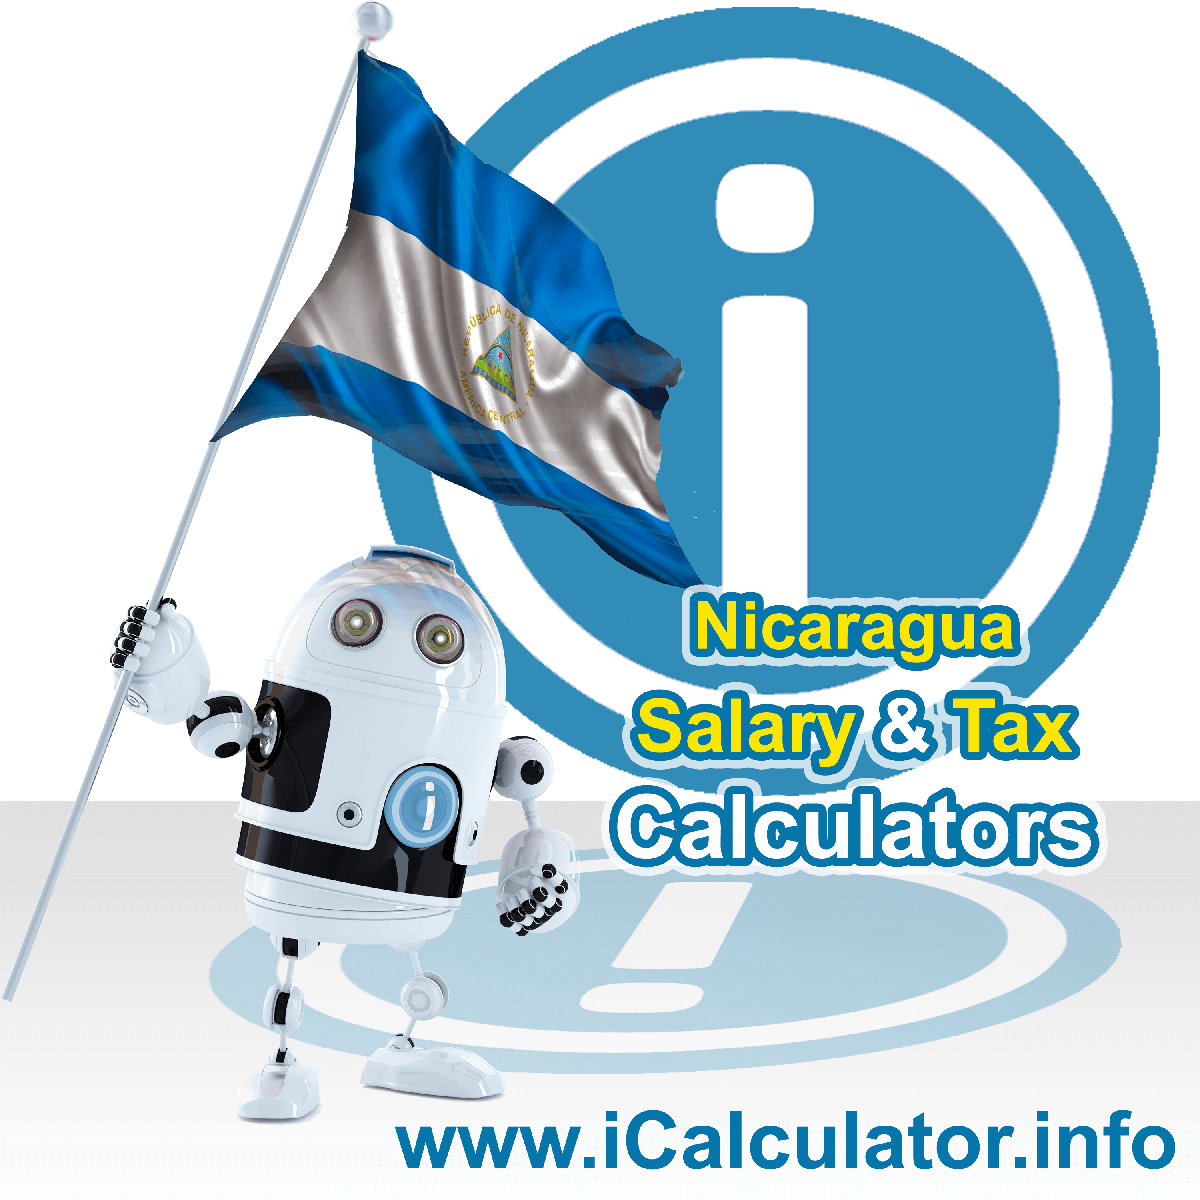 Nicaragua Wage Calculator. This image shows the Nicaragua flag and information relating to the tax formula for the Nicaragua Tax Calculator